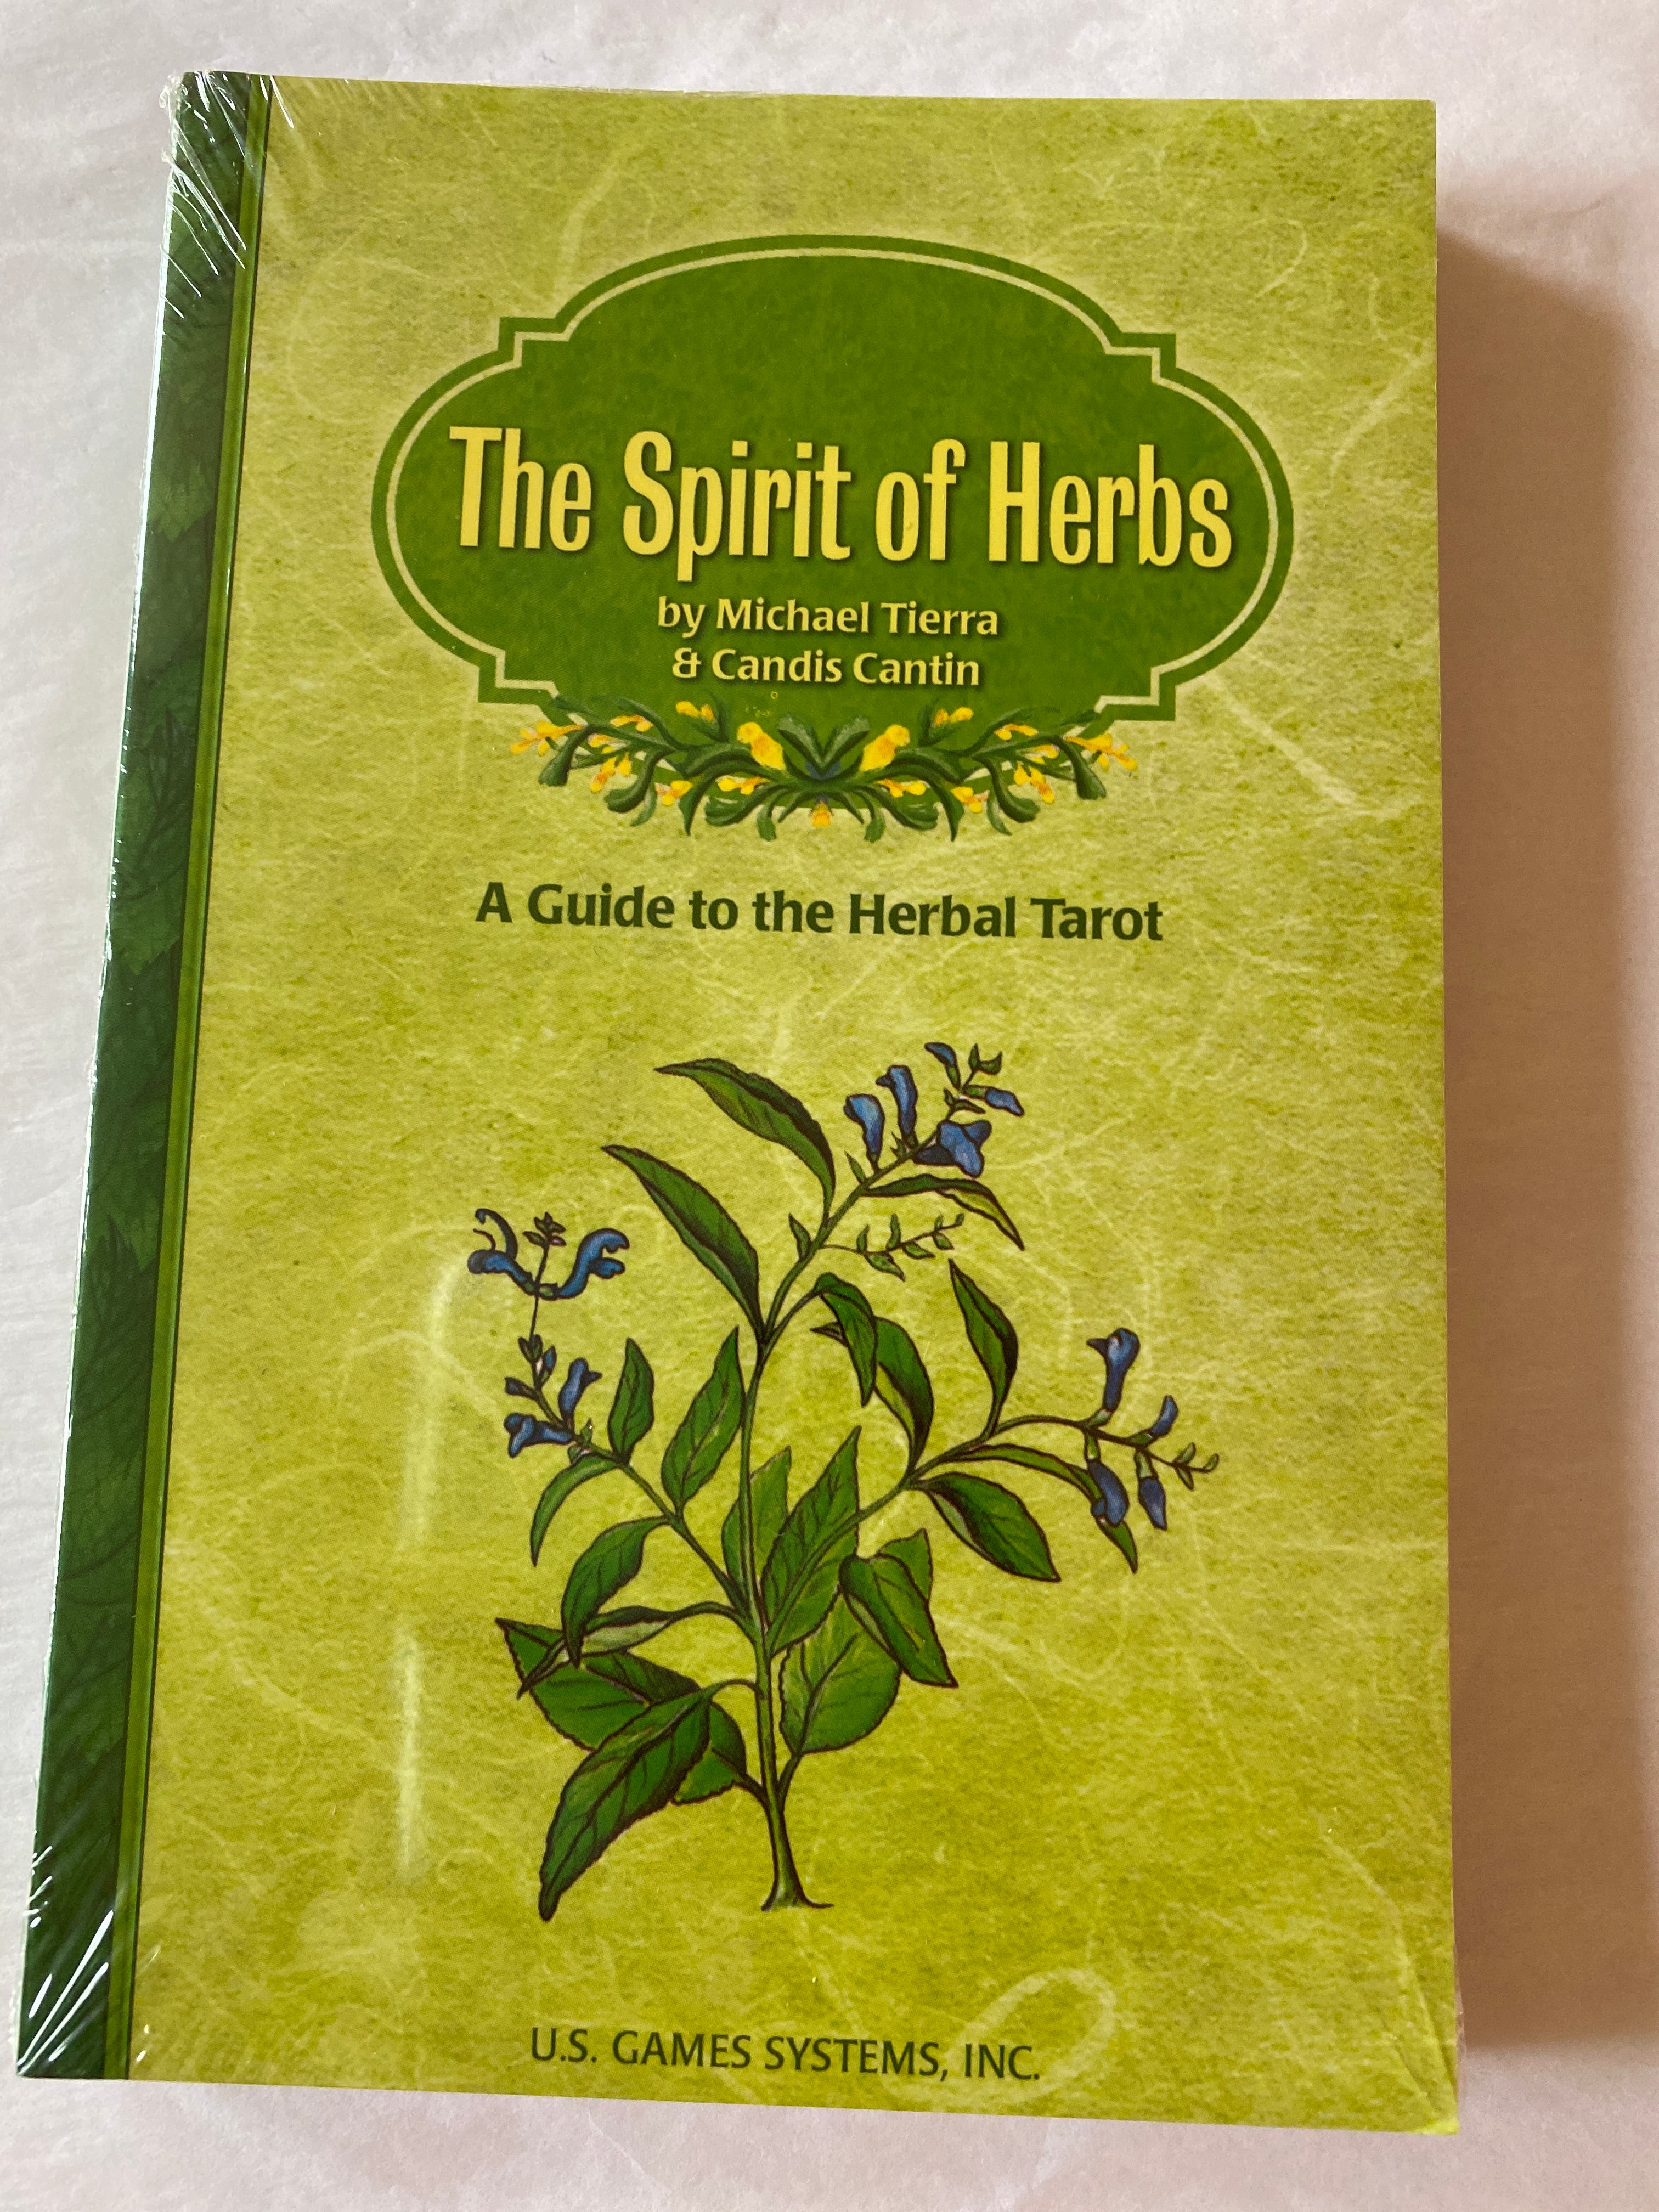 The Spirit of Herbs Guide